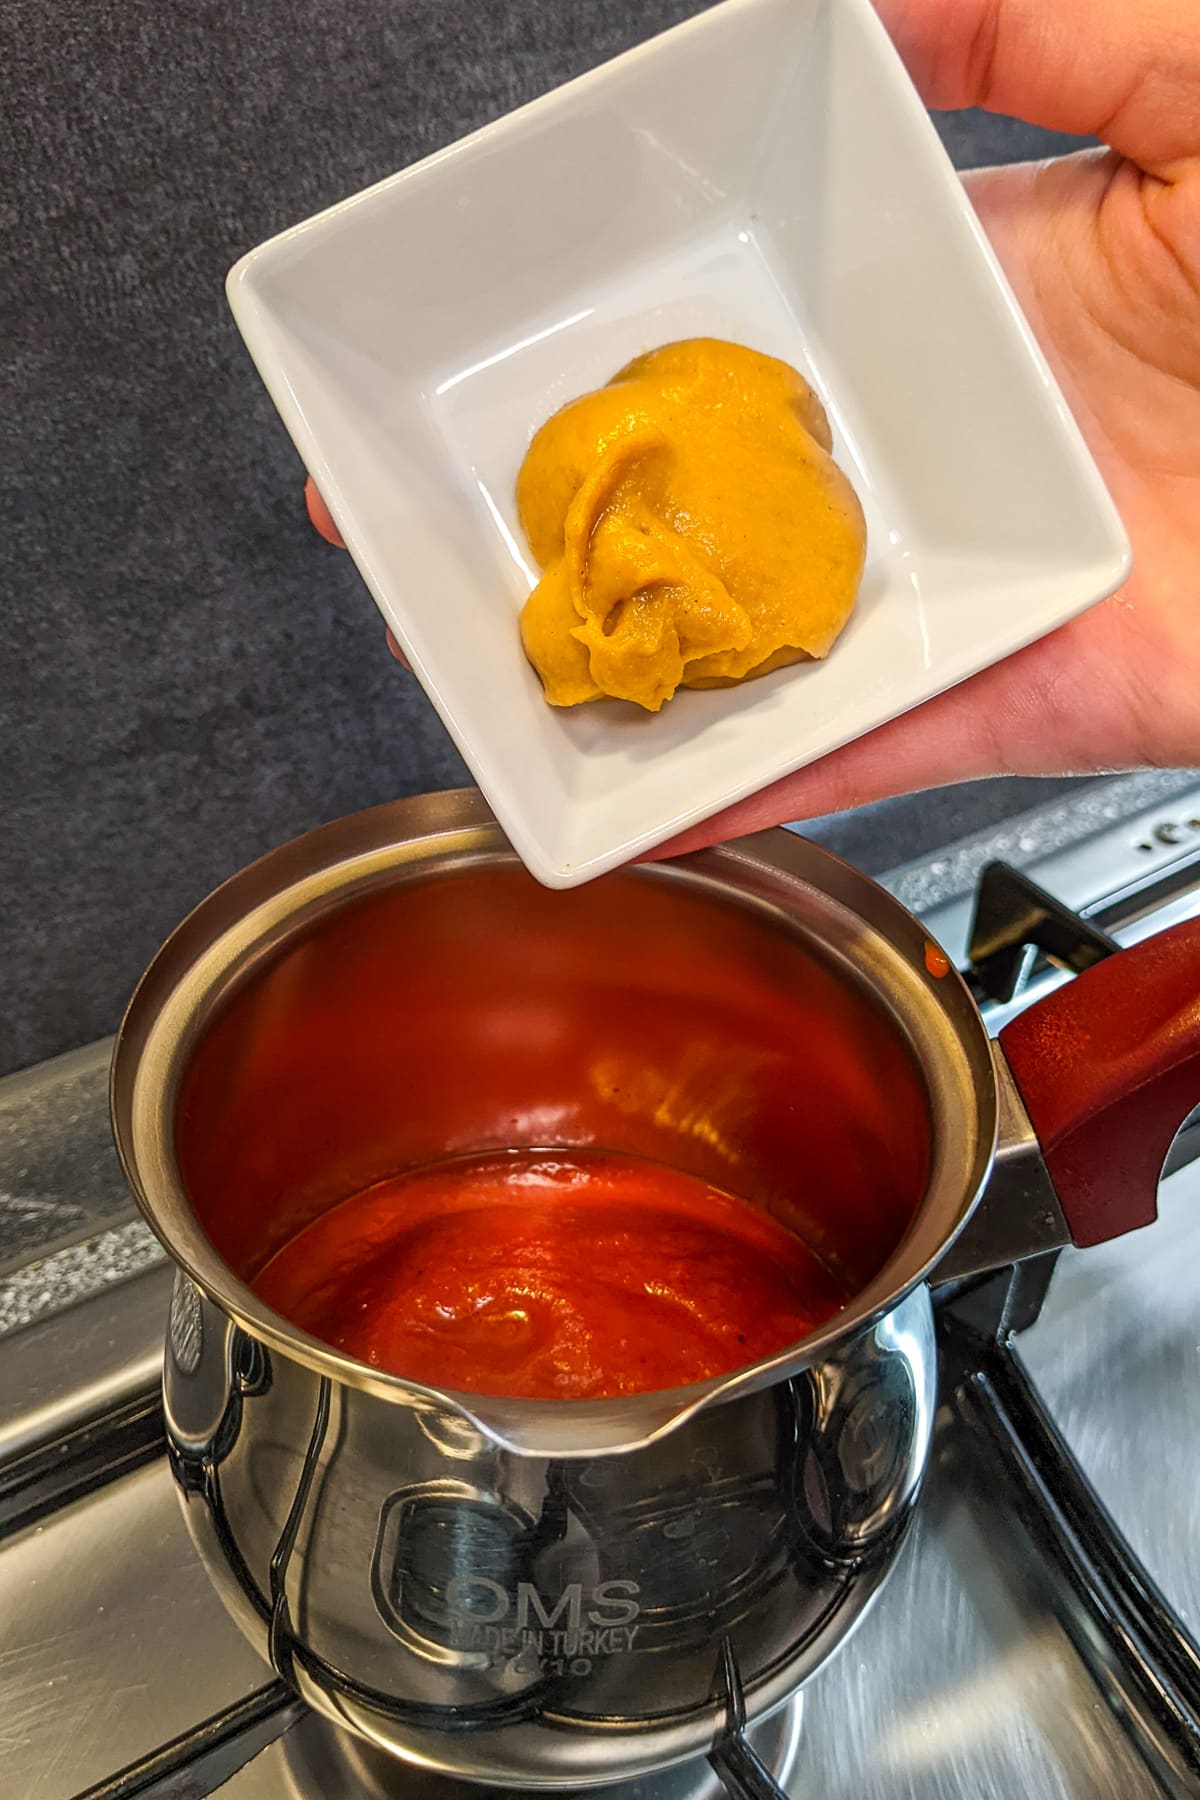 Pouring mustard in a sauce pan with ketchup.